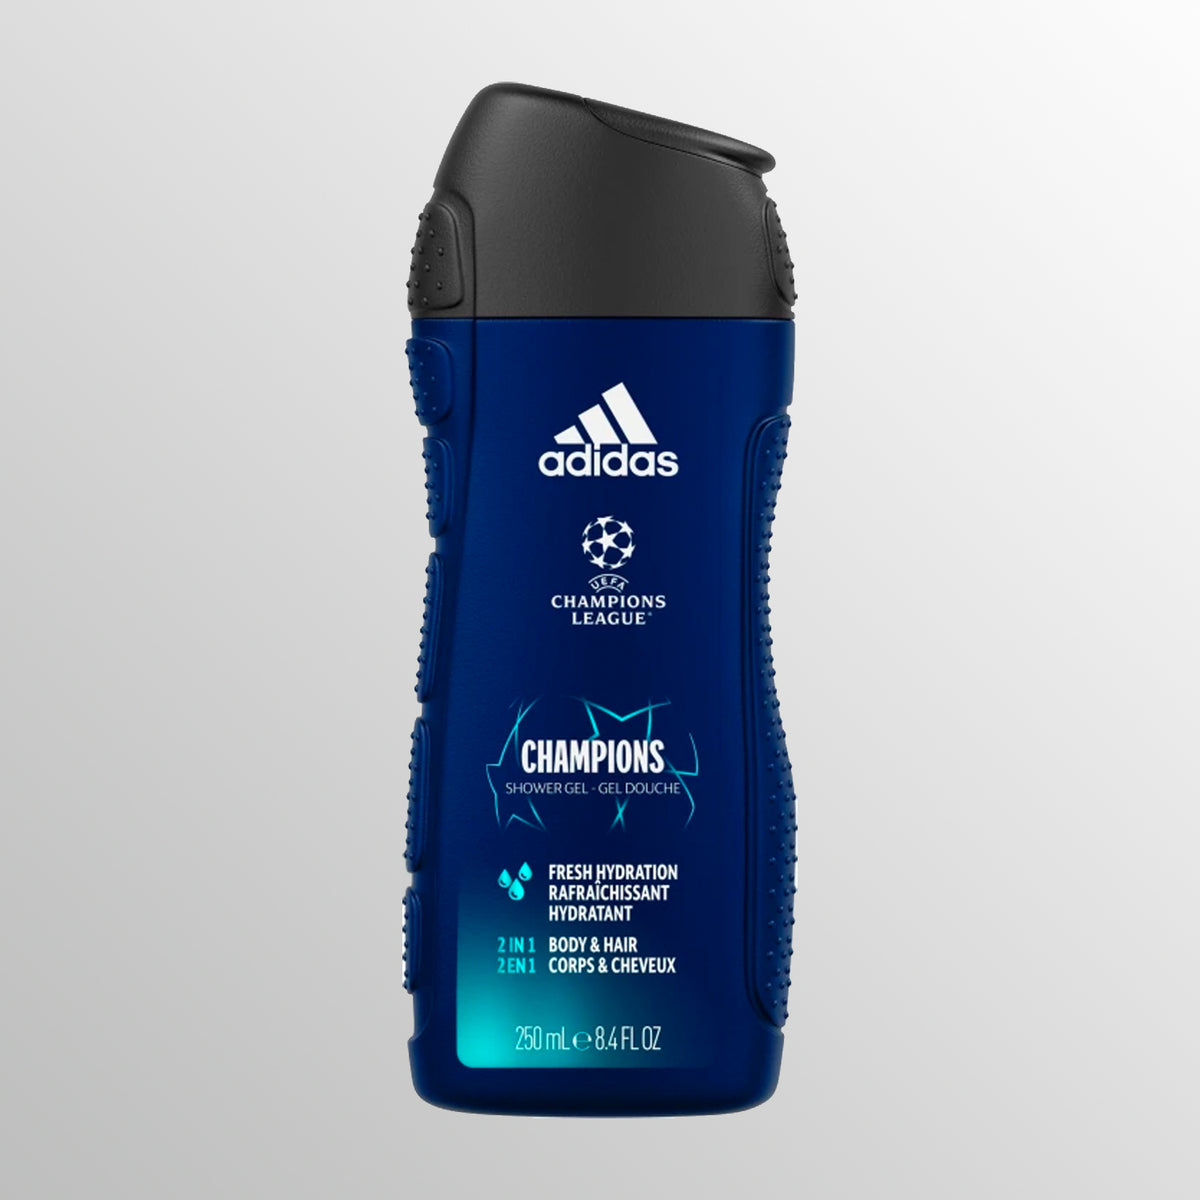 Adidas Champions Shower Gel 250ml UEFA Club Competitions Online Store